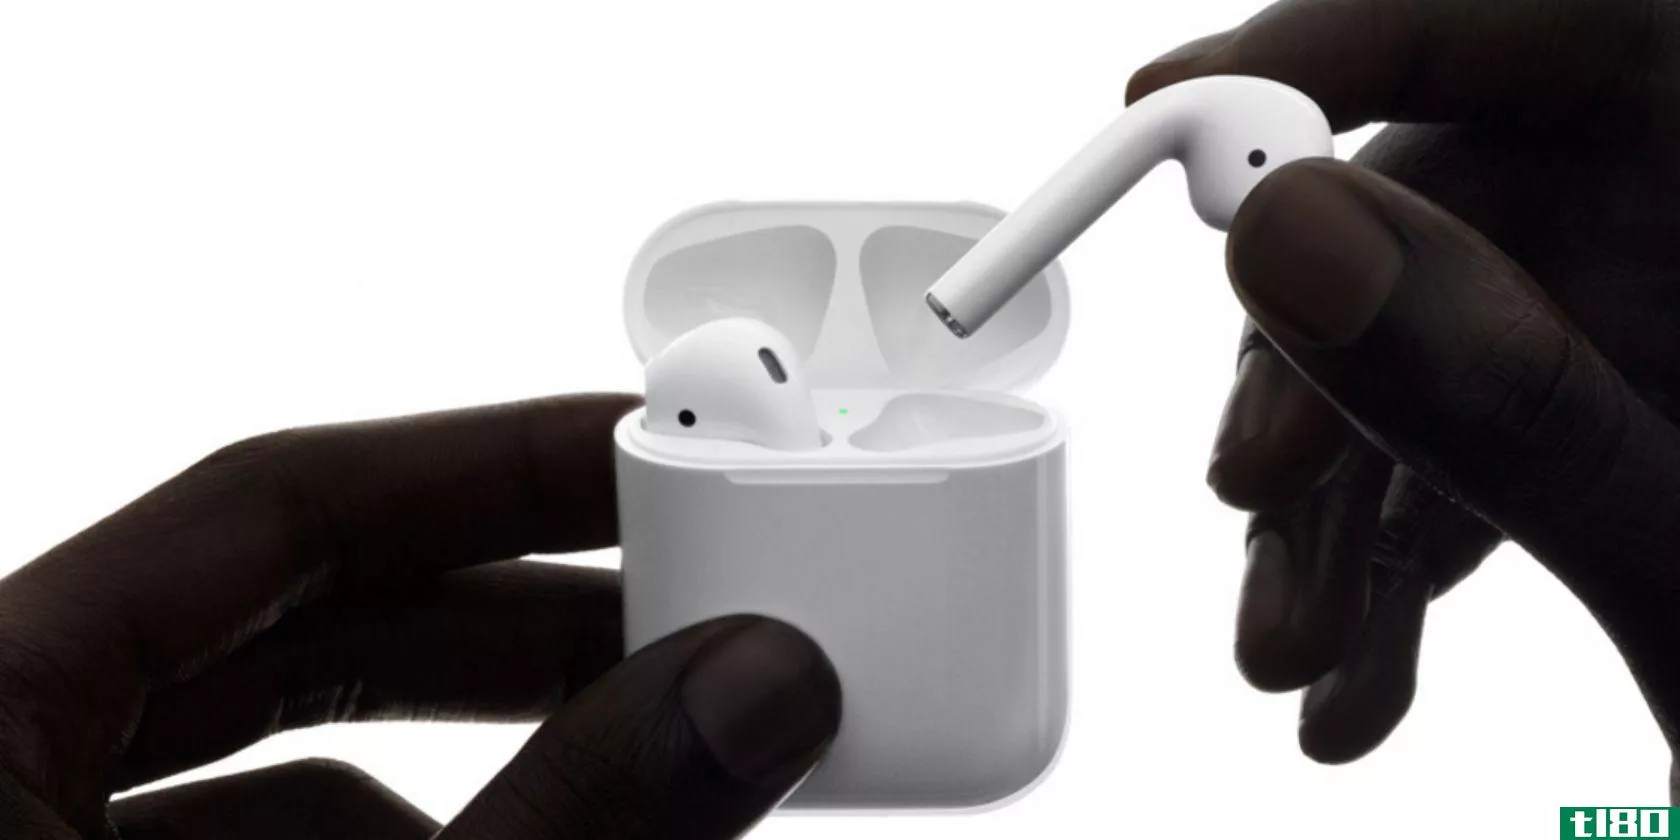 apple-airpods-hands